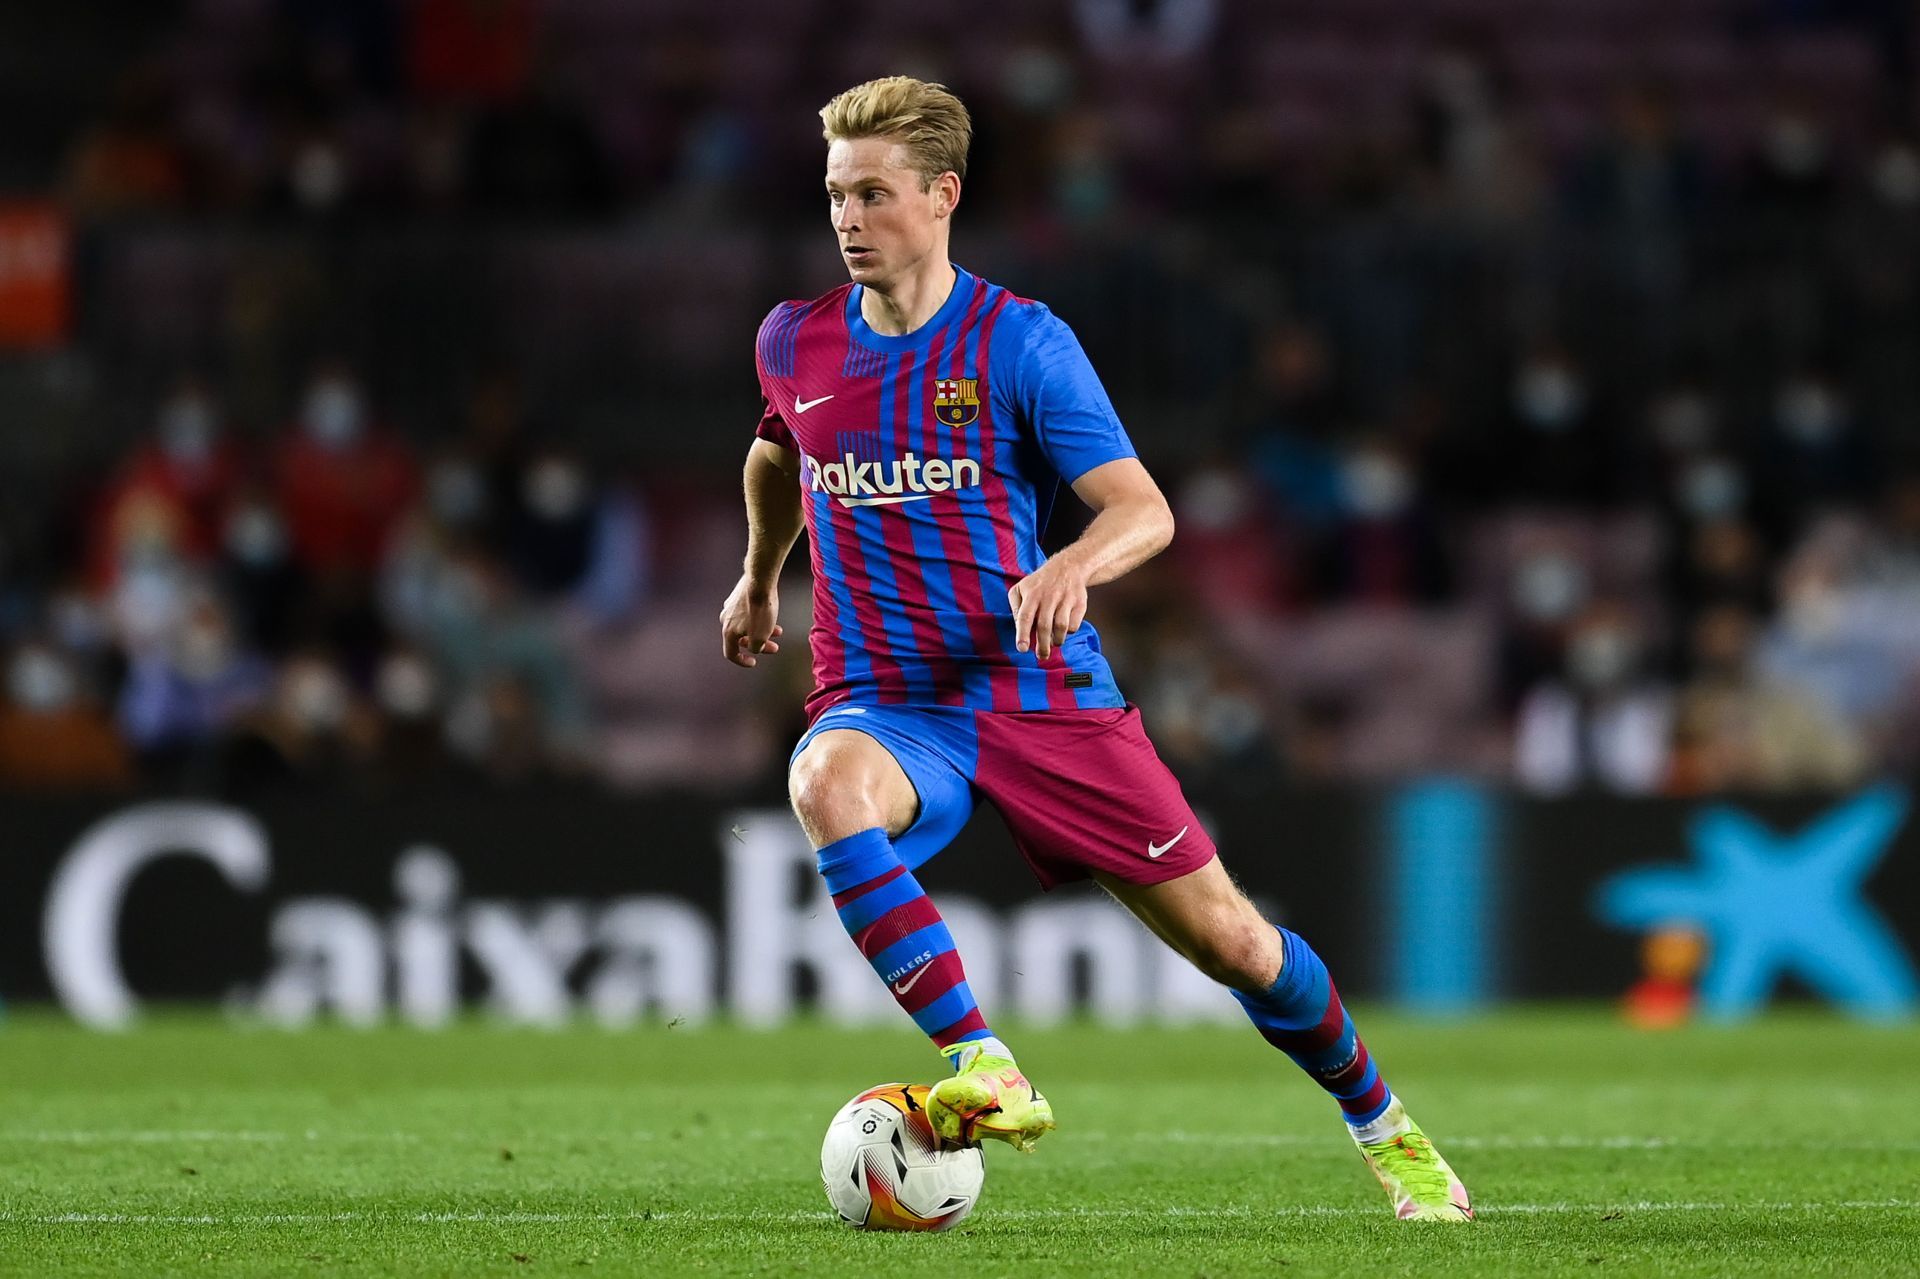 Manchester United want to sign Frenkie de Jong from Barcelona